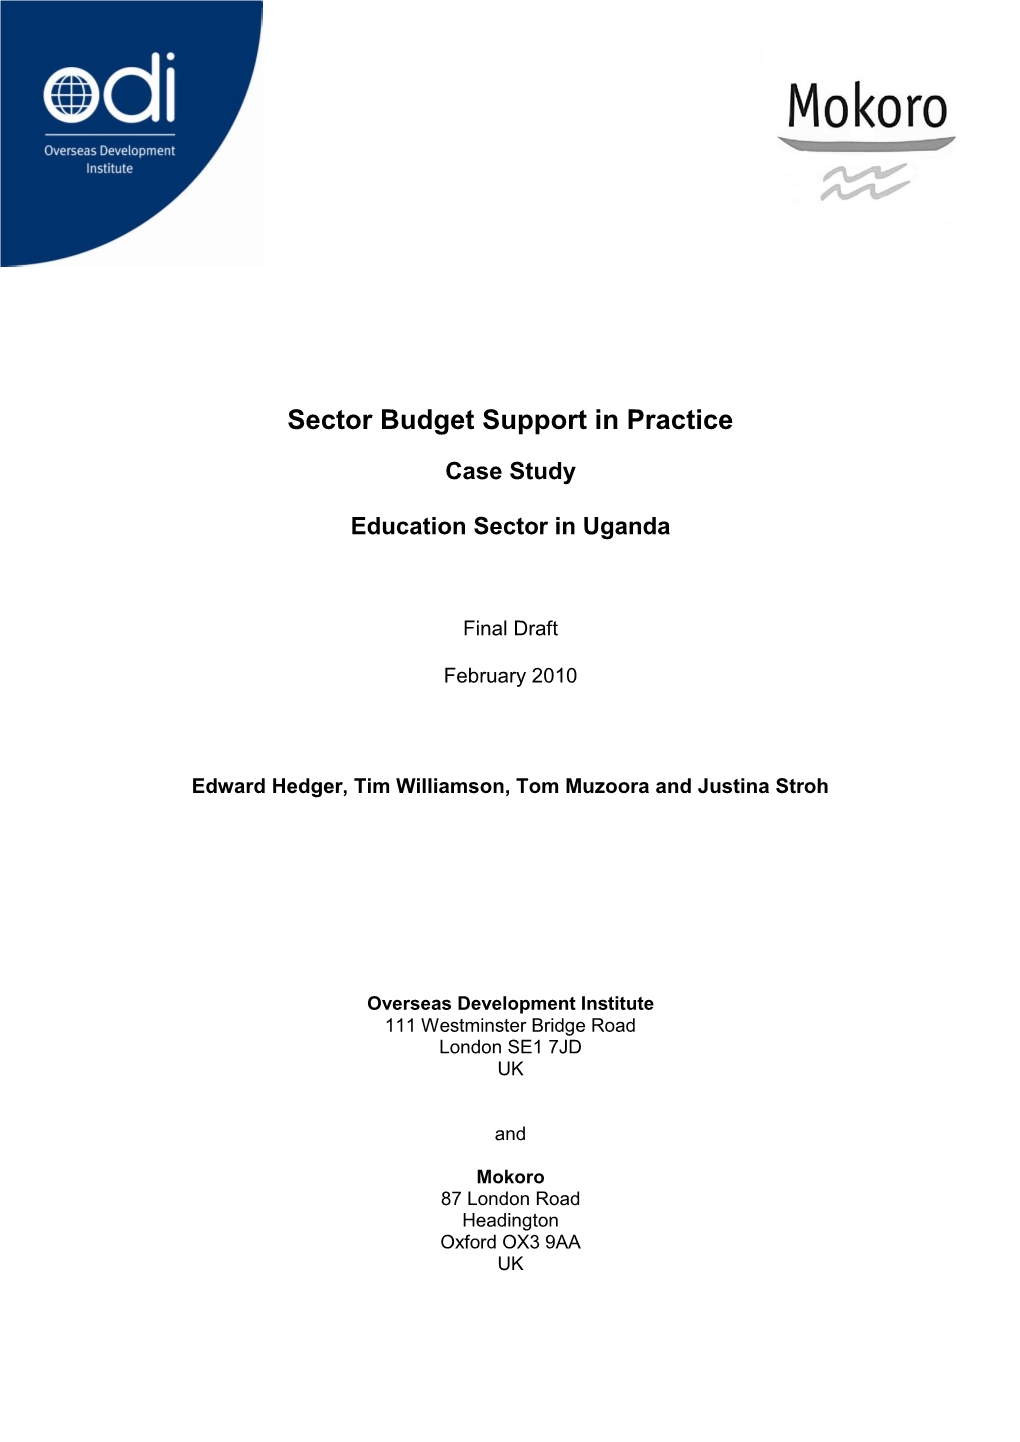 Sector Budget Support in Practice: Education Sector in Uganda